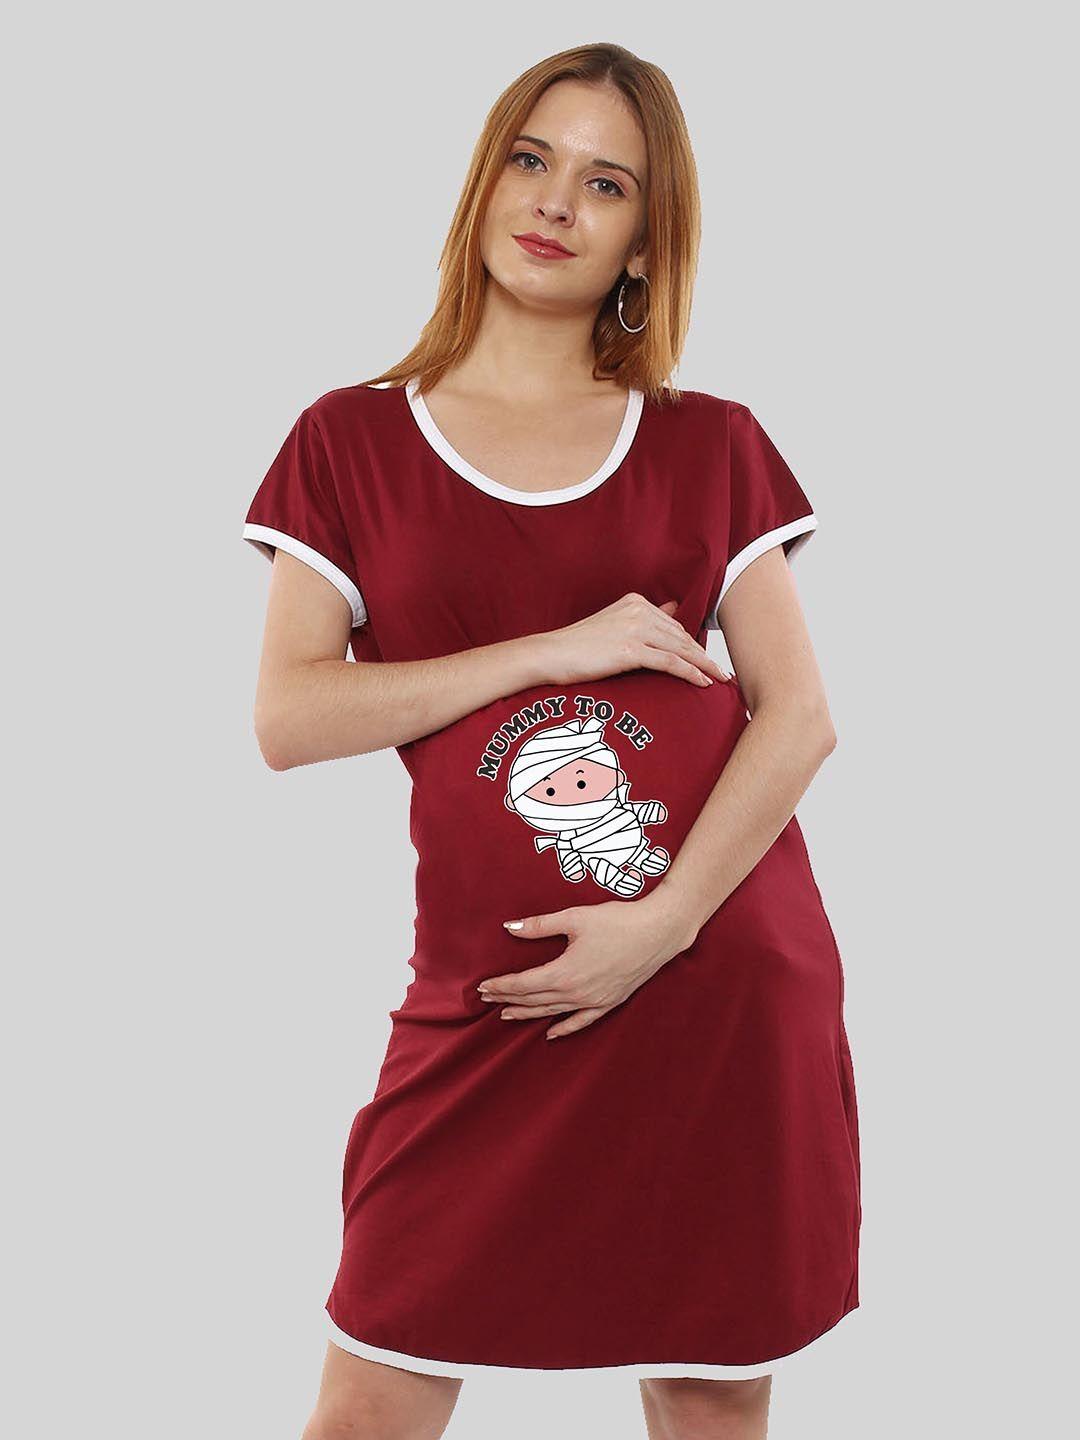 sillyboom graphic printed pure cotton maternity t shirt night dress